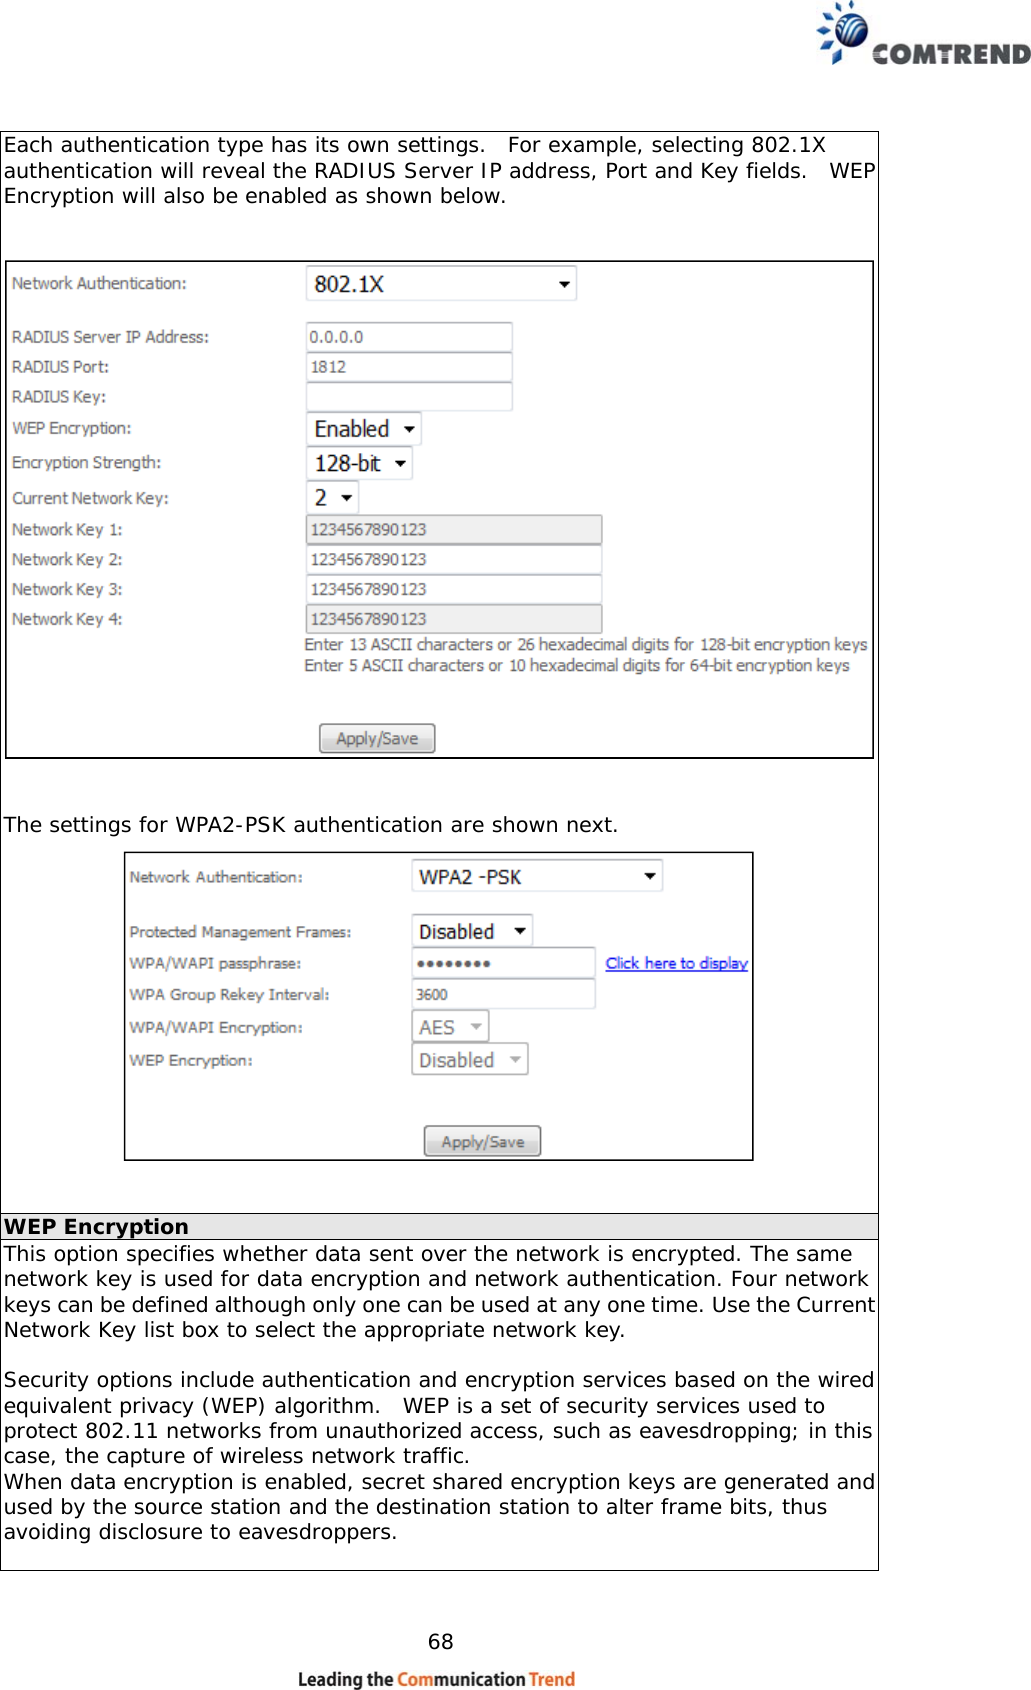    68 Each authentication type has its own settings.  For example, selecting 802.1X authentication will reveal the RADIUS Server IP address, Port and Key fields.  WEP Encryption will also be enabled as shown below.     The settings for WPA2-PSK authentication are shown next.    WEP Encryption This option specifies whether data sent over the network is encrypted. The same network key is used for data encryption and network authentication. Four network keys can be defined although only one can be used at any one time. Use the Current Network Key list box to select the appropriate network key.   Security options include authentication and encryption services based on the wired equivalent privacy (WEP) algorithm.  WEP is a set of security services used to protect 802.11 networks from unauthorized access, such as eavesdropping; in this case, the capture of wireless network traffic.   When data encryption is enabled, secret shared encryption keys are generated and used by the source station and the destination station to alter frame bits, thus avoiding disclosure to eavesdroppers.  